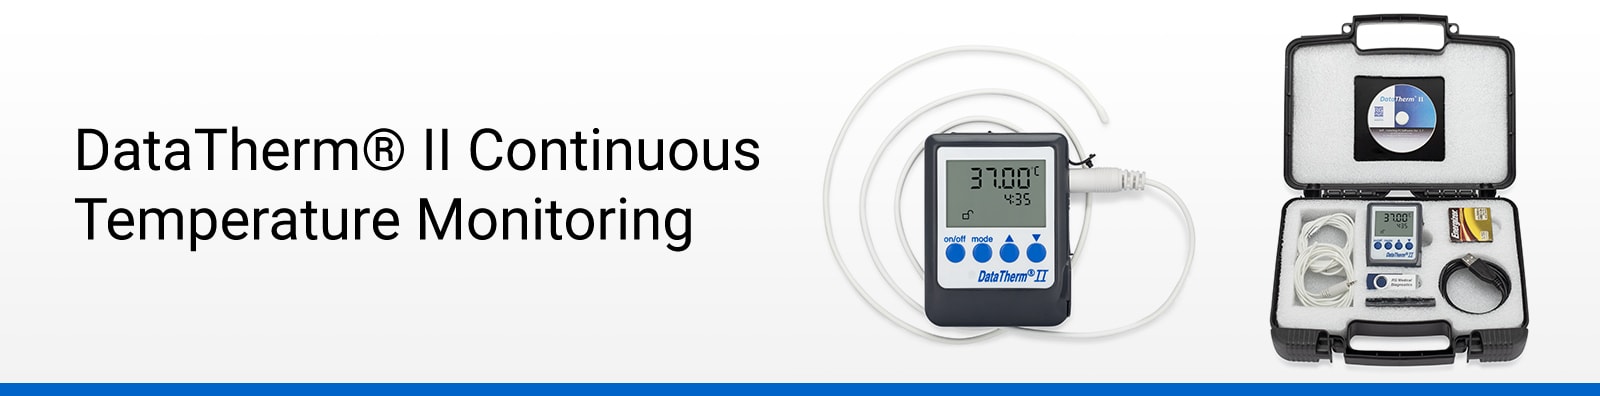 DataTherm® II Continuous Temperature Monitoring - Henry Schein Medical